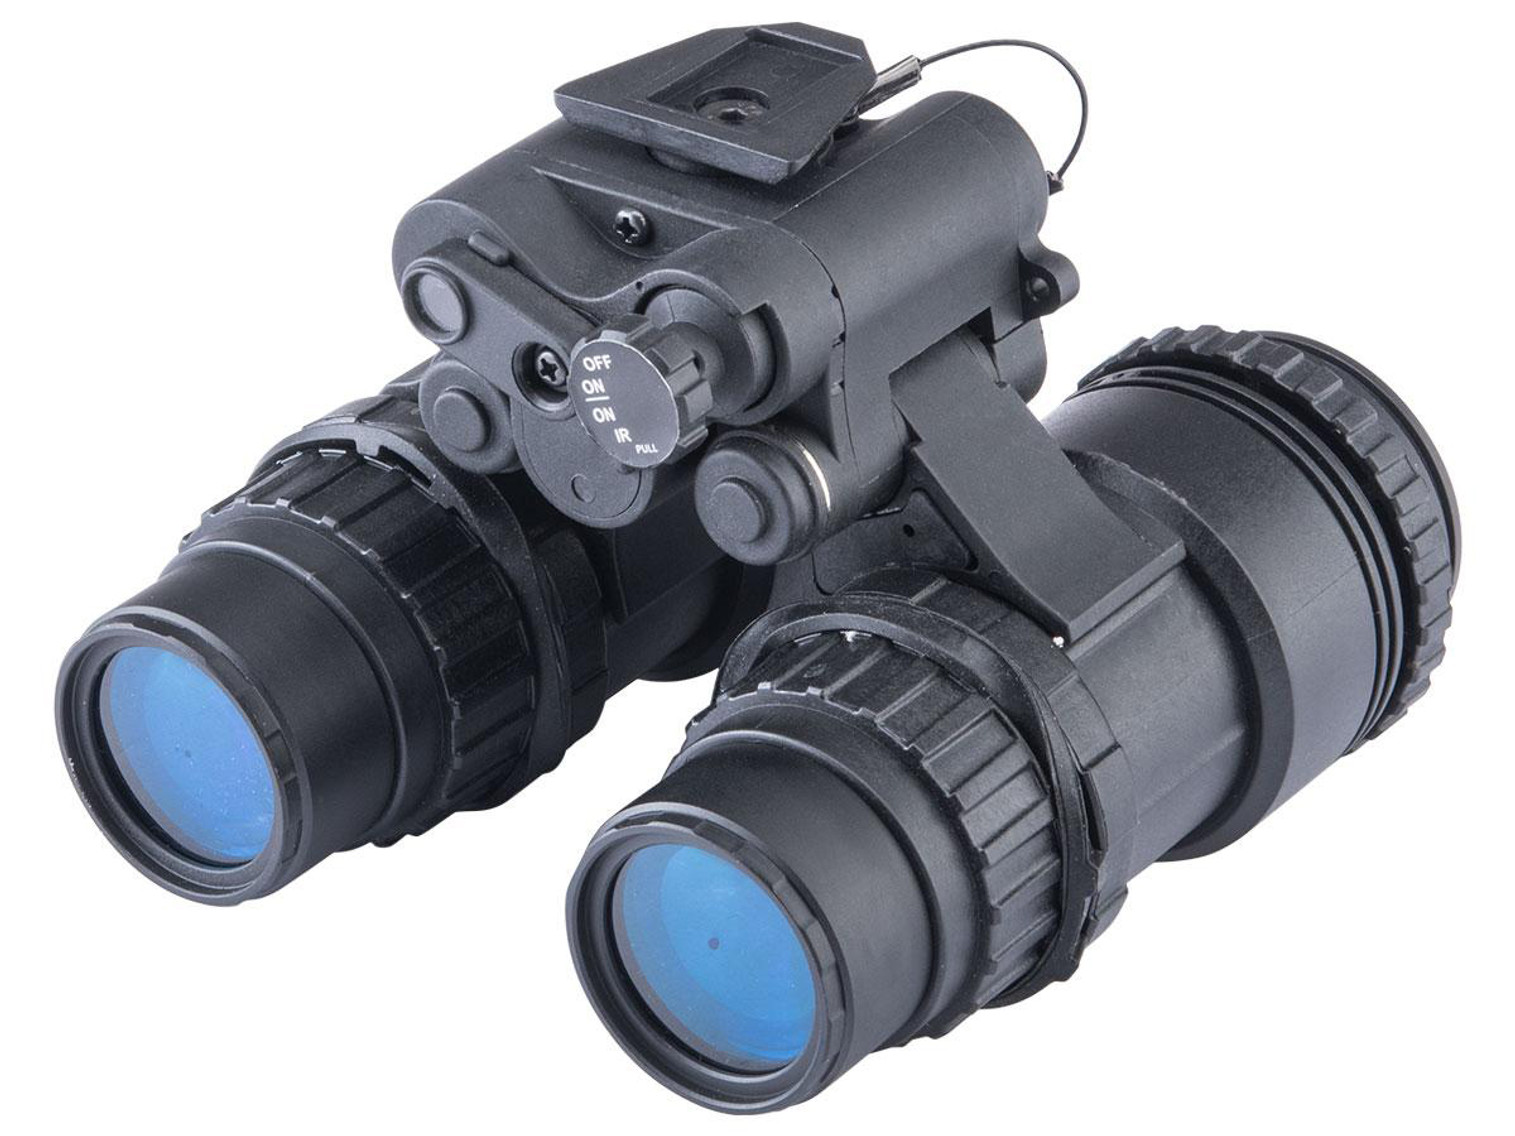 FMA New Version AN/PVS-15 Non-Functional Night Vision Goggles